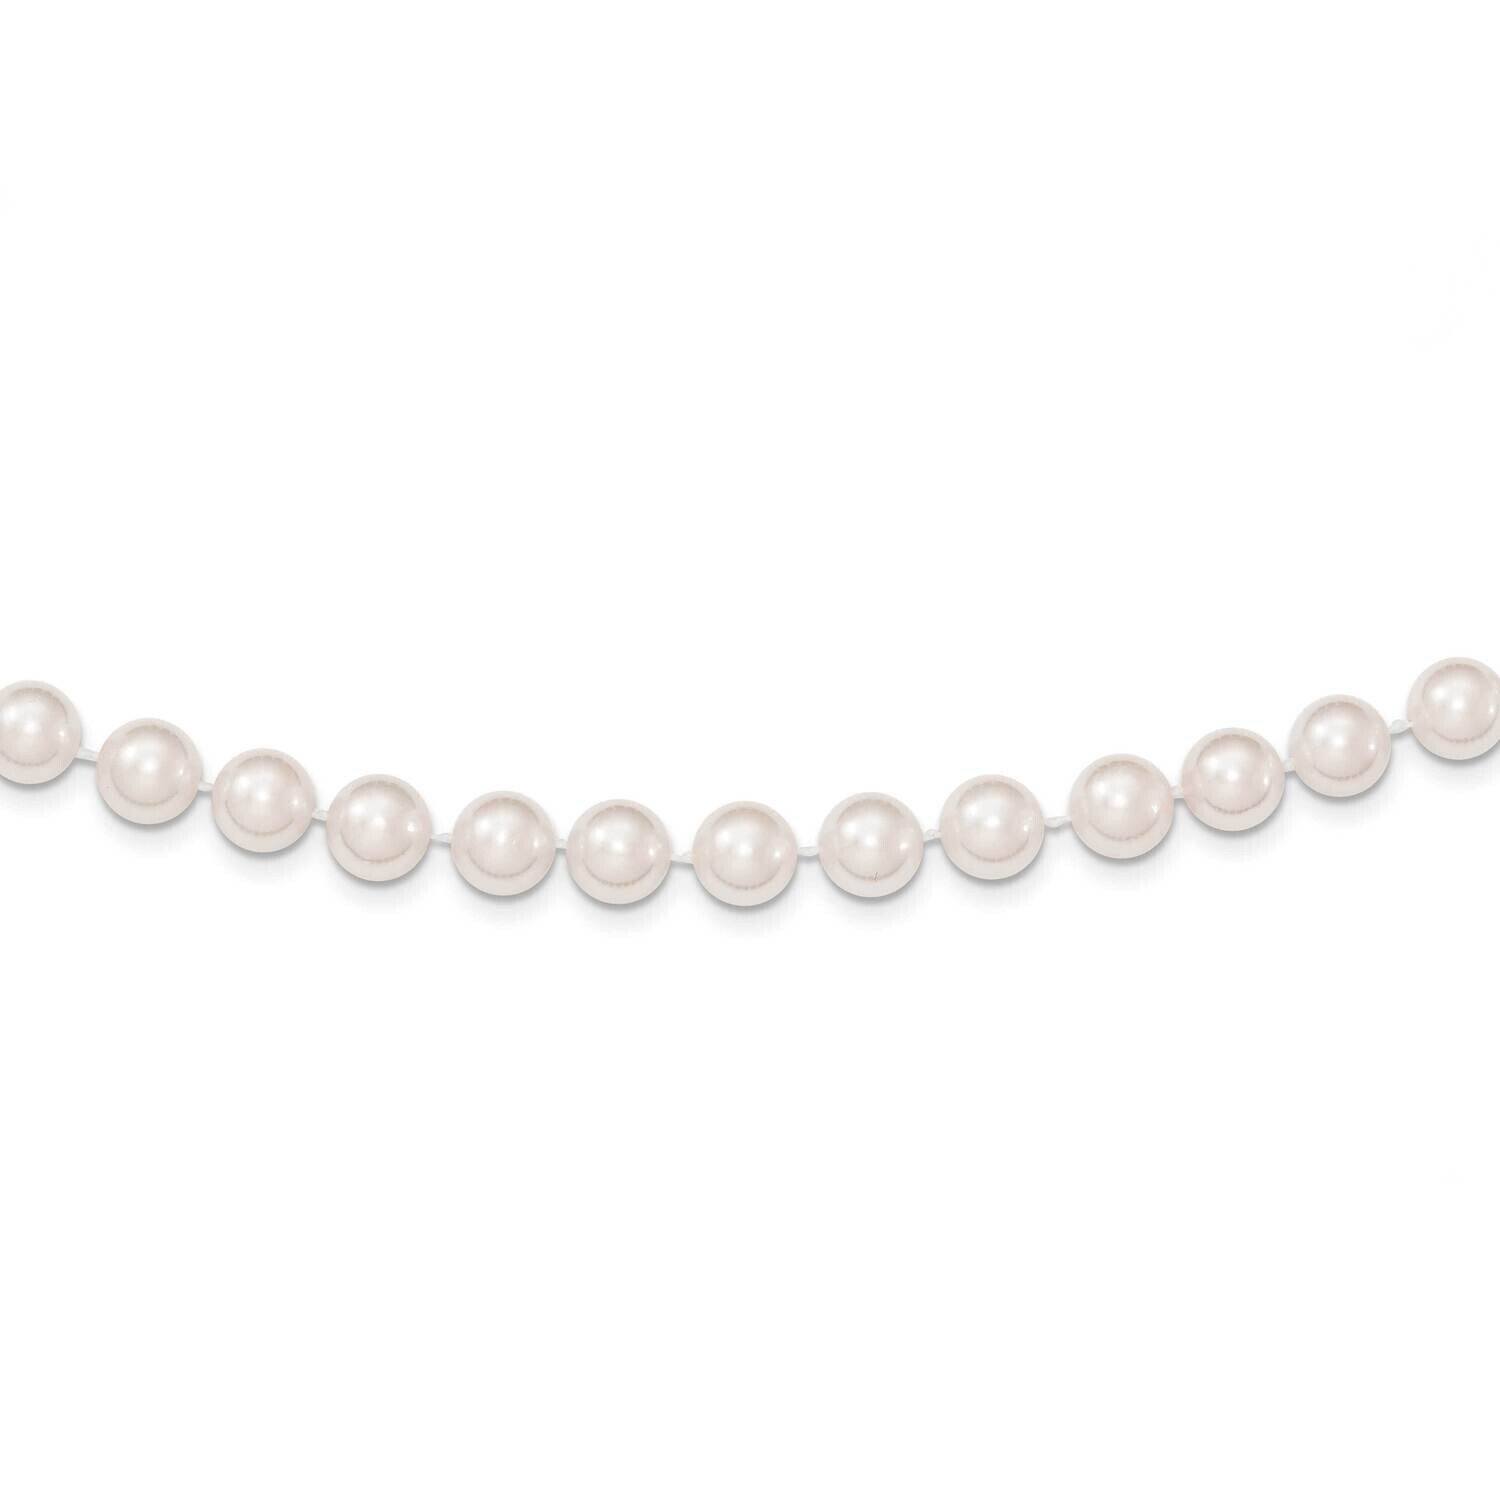 7-8mm Round White Saltwater Akoya Cultured Pearl Necklace 20 Inch 14k Gold PL70A-20